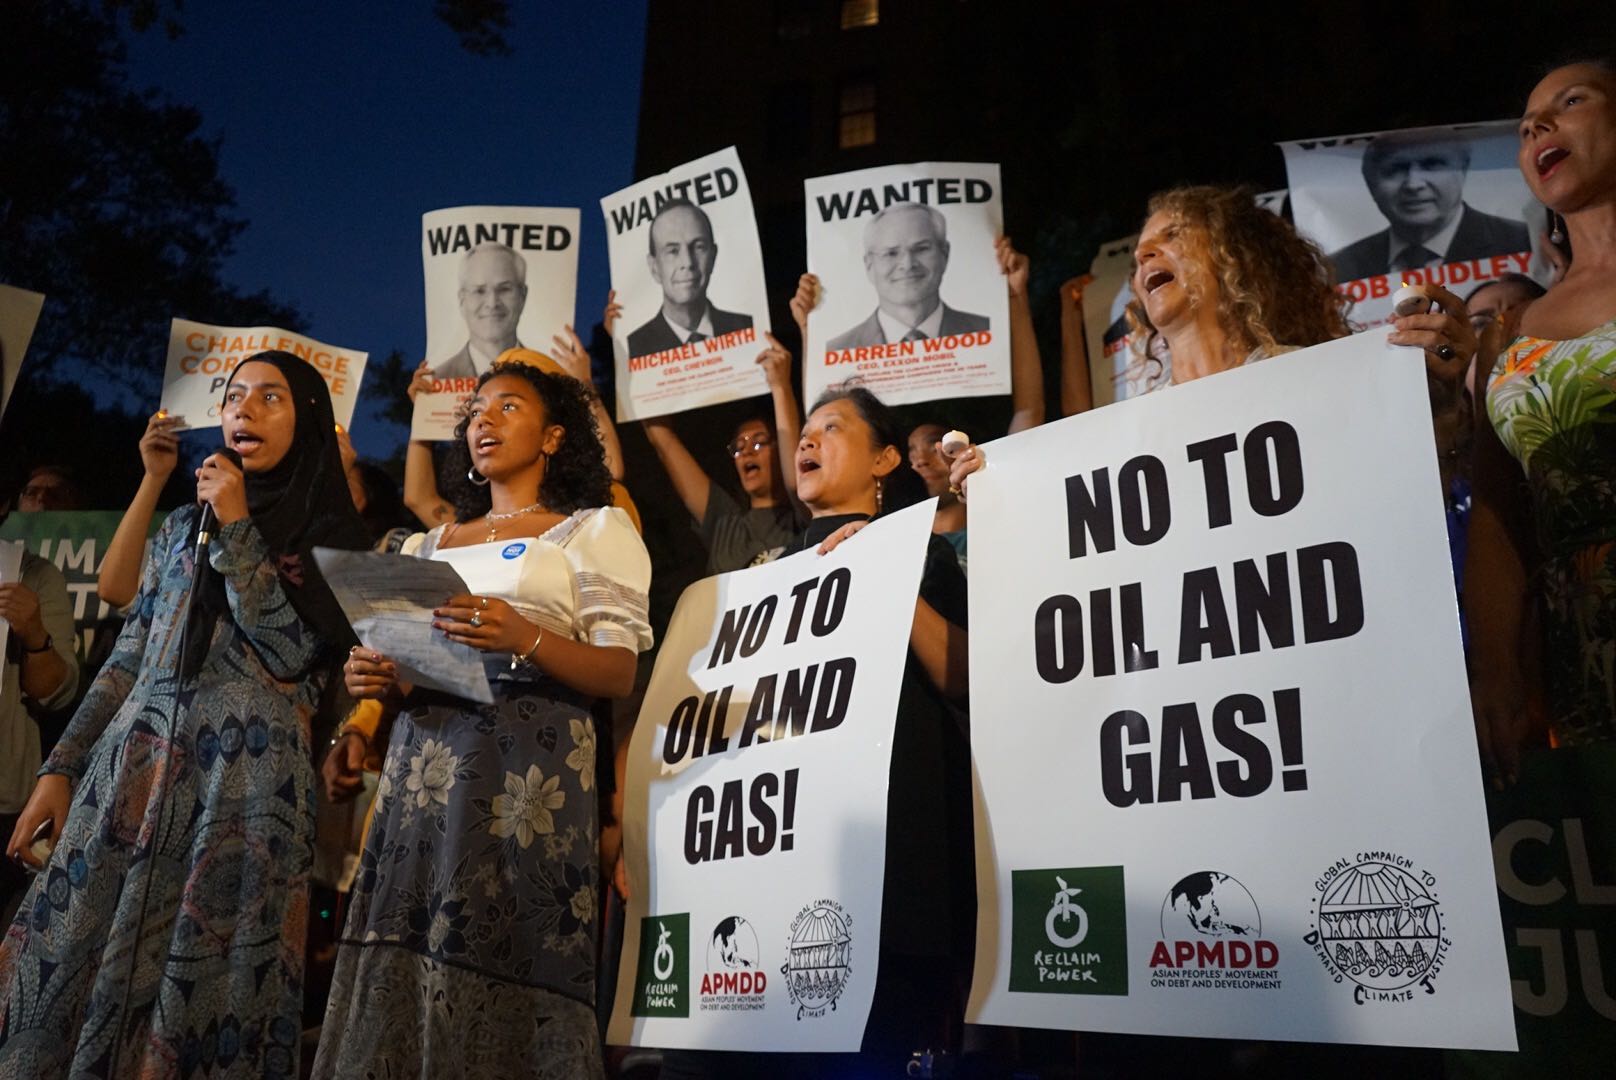 NYC youth and global frontline leaders disrupt Oil & Gas Climate Initiative greenwash soirée